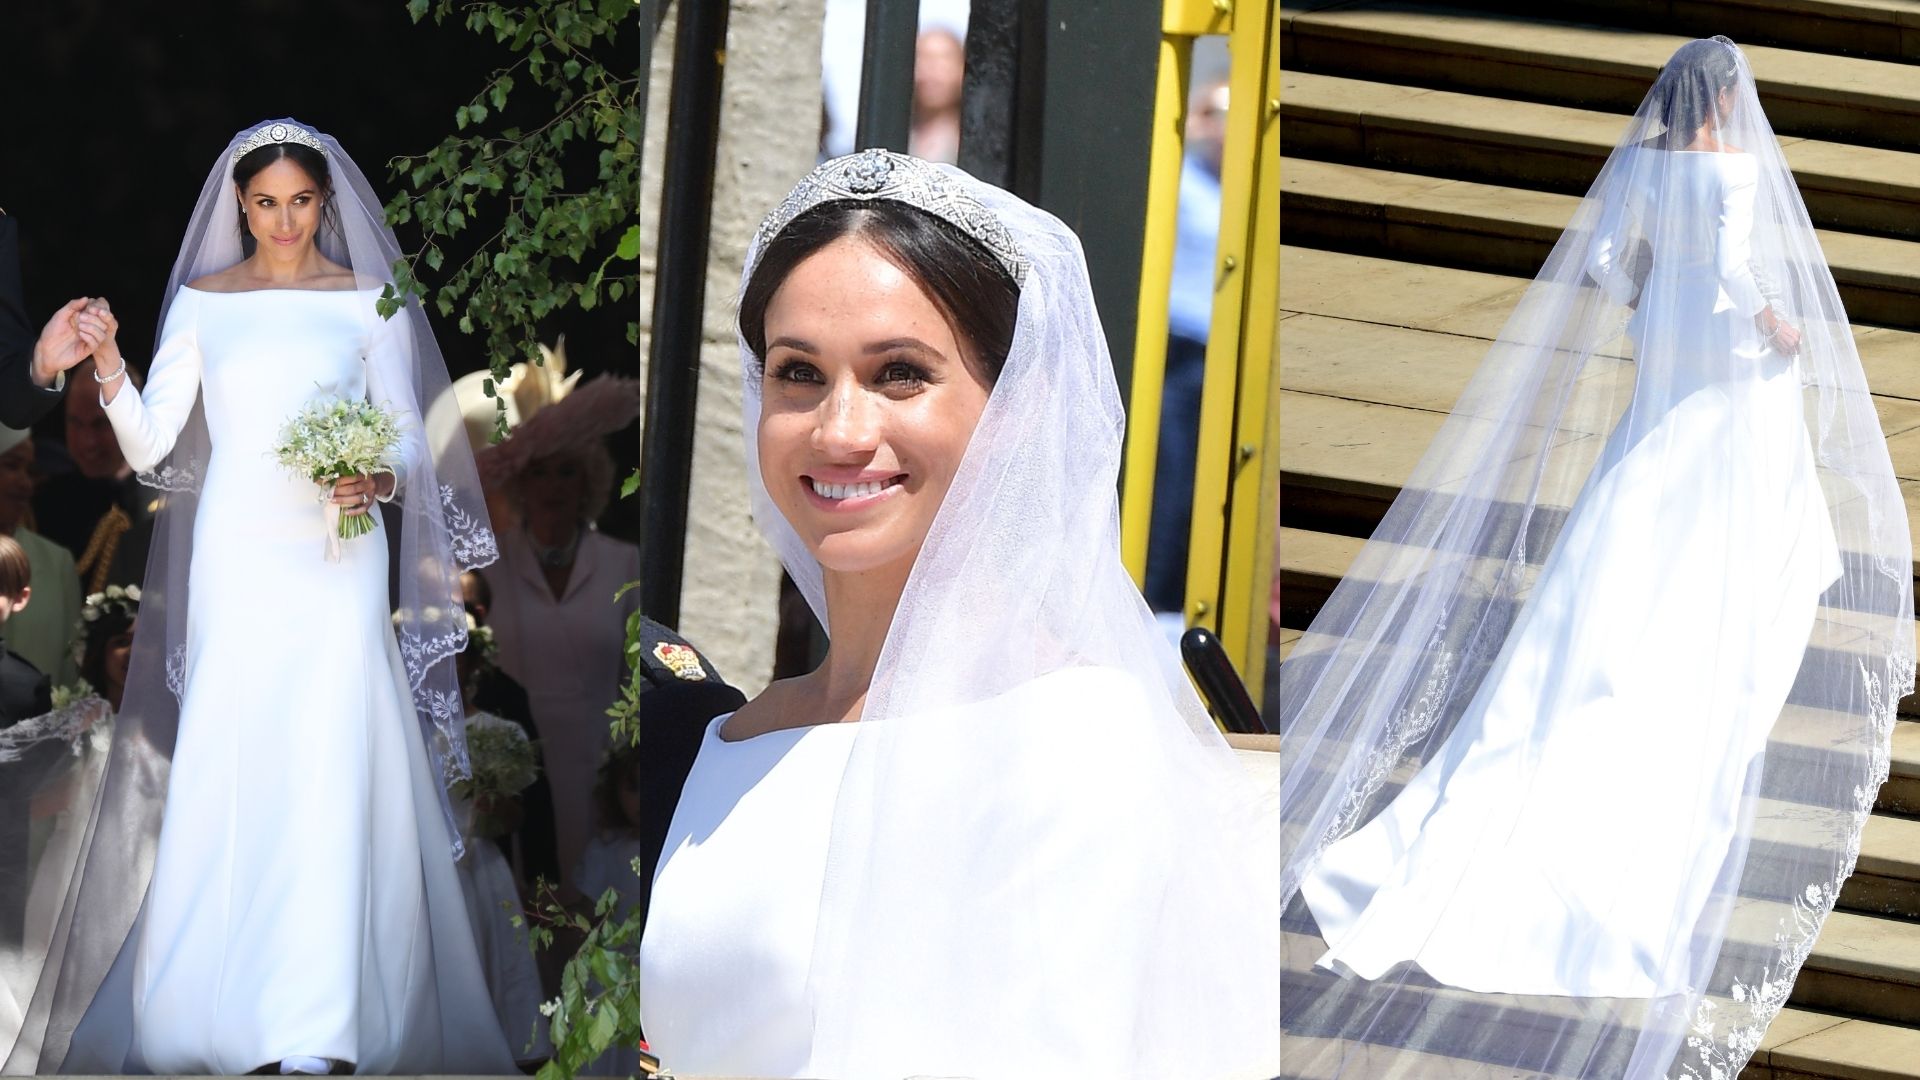 Meghan Markle's wedding dress: The significance behind it | Woman u0026 Home